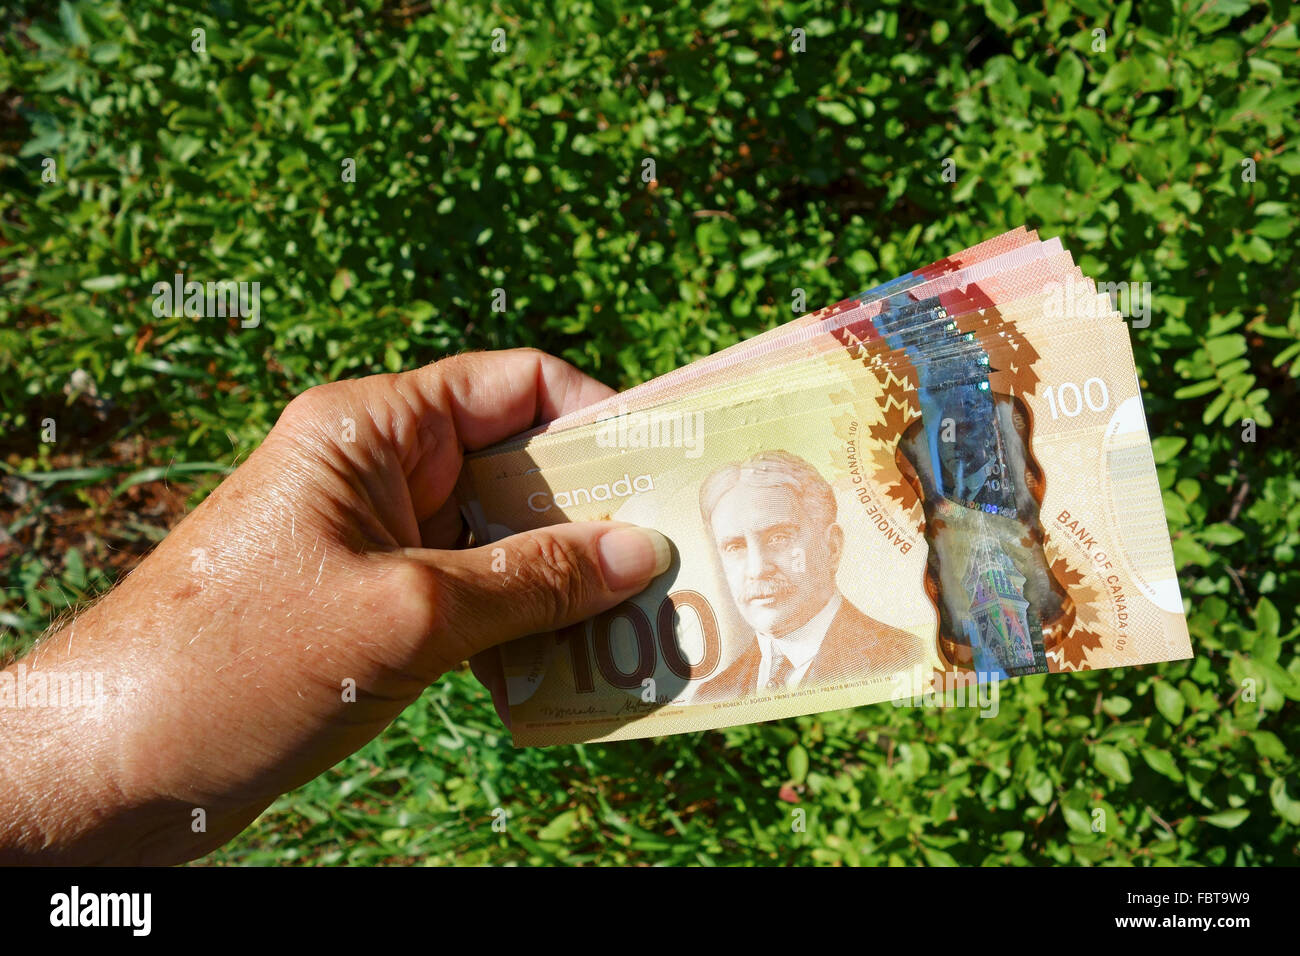 A stack of Canadian 100 dollar bills held in a hand in front of a hedge Stock Photo